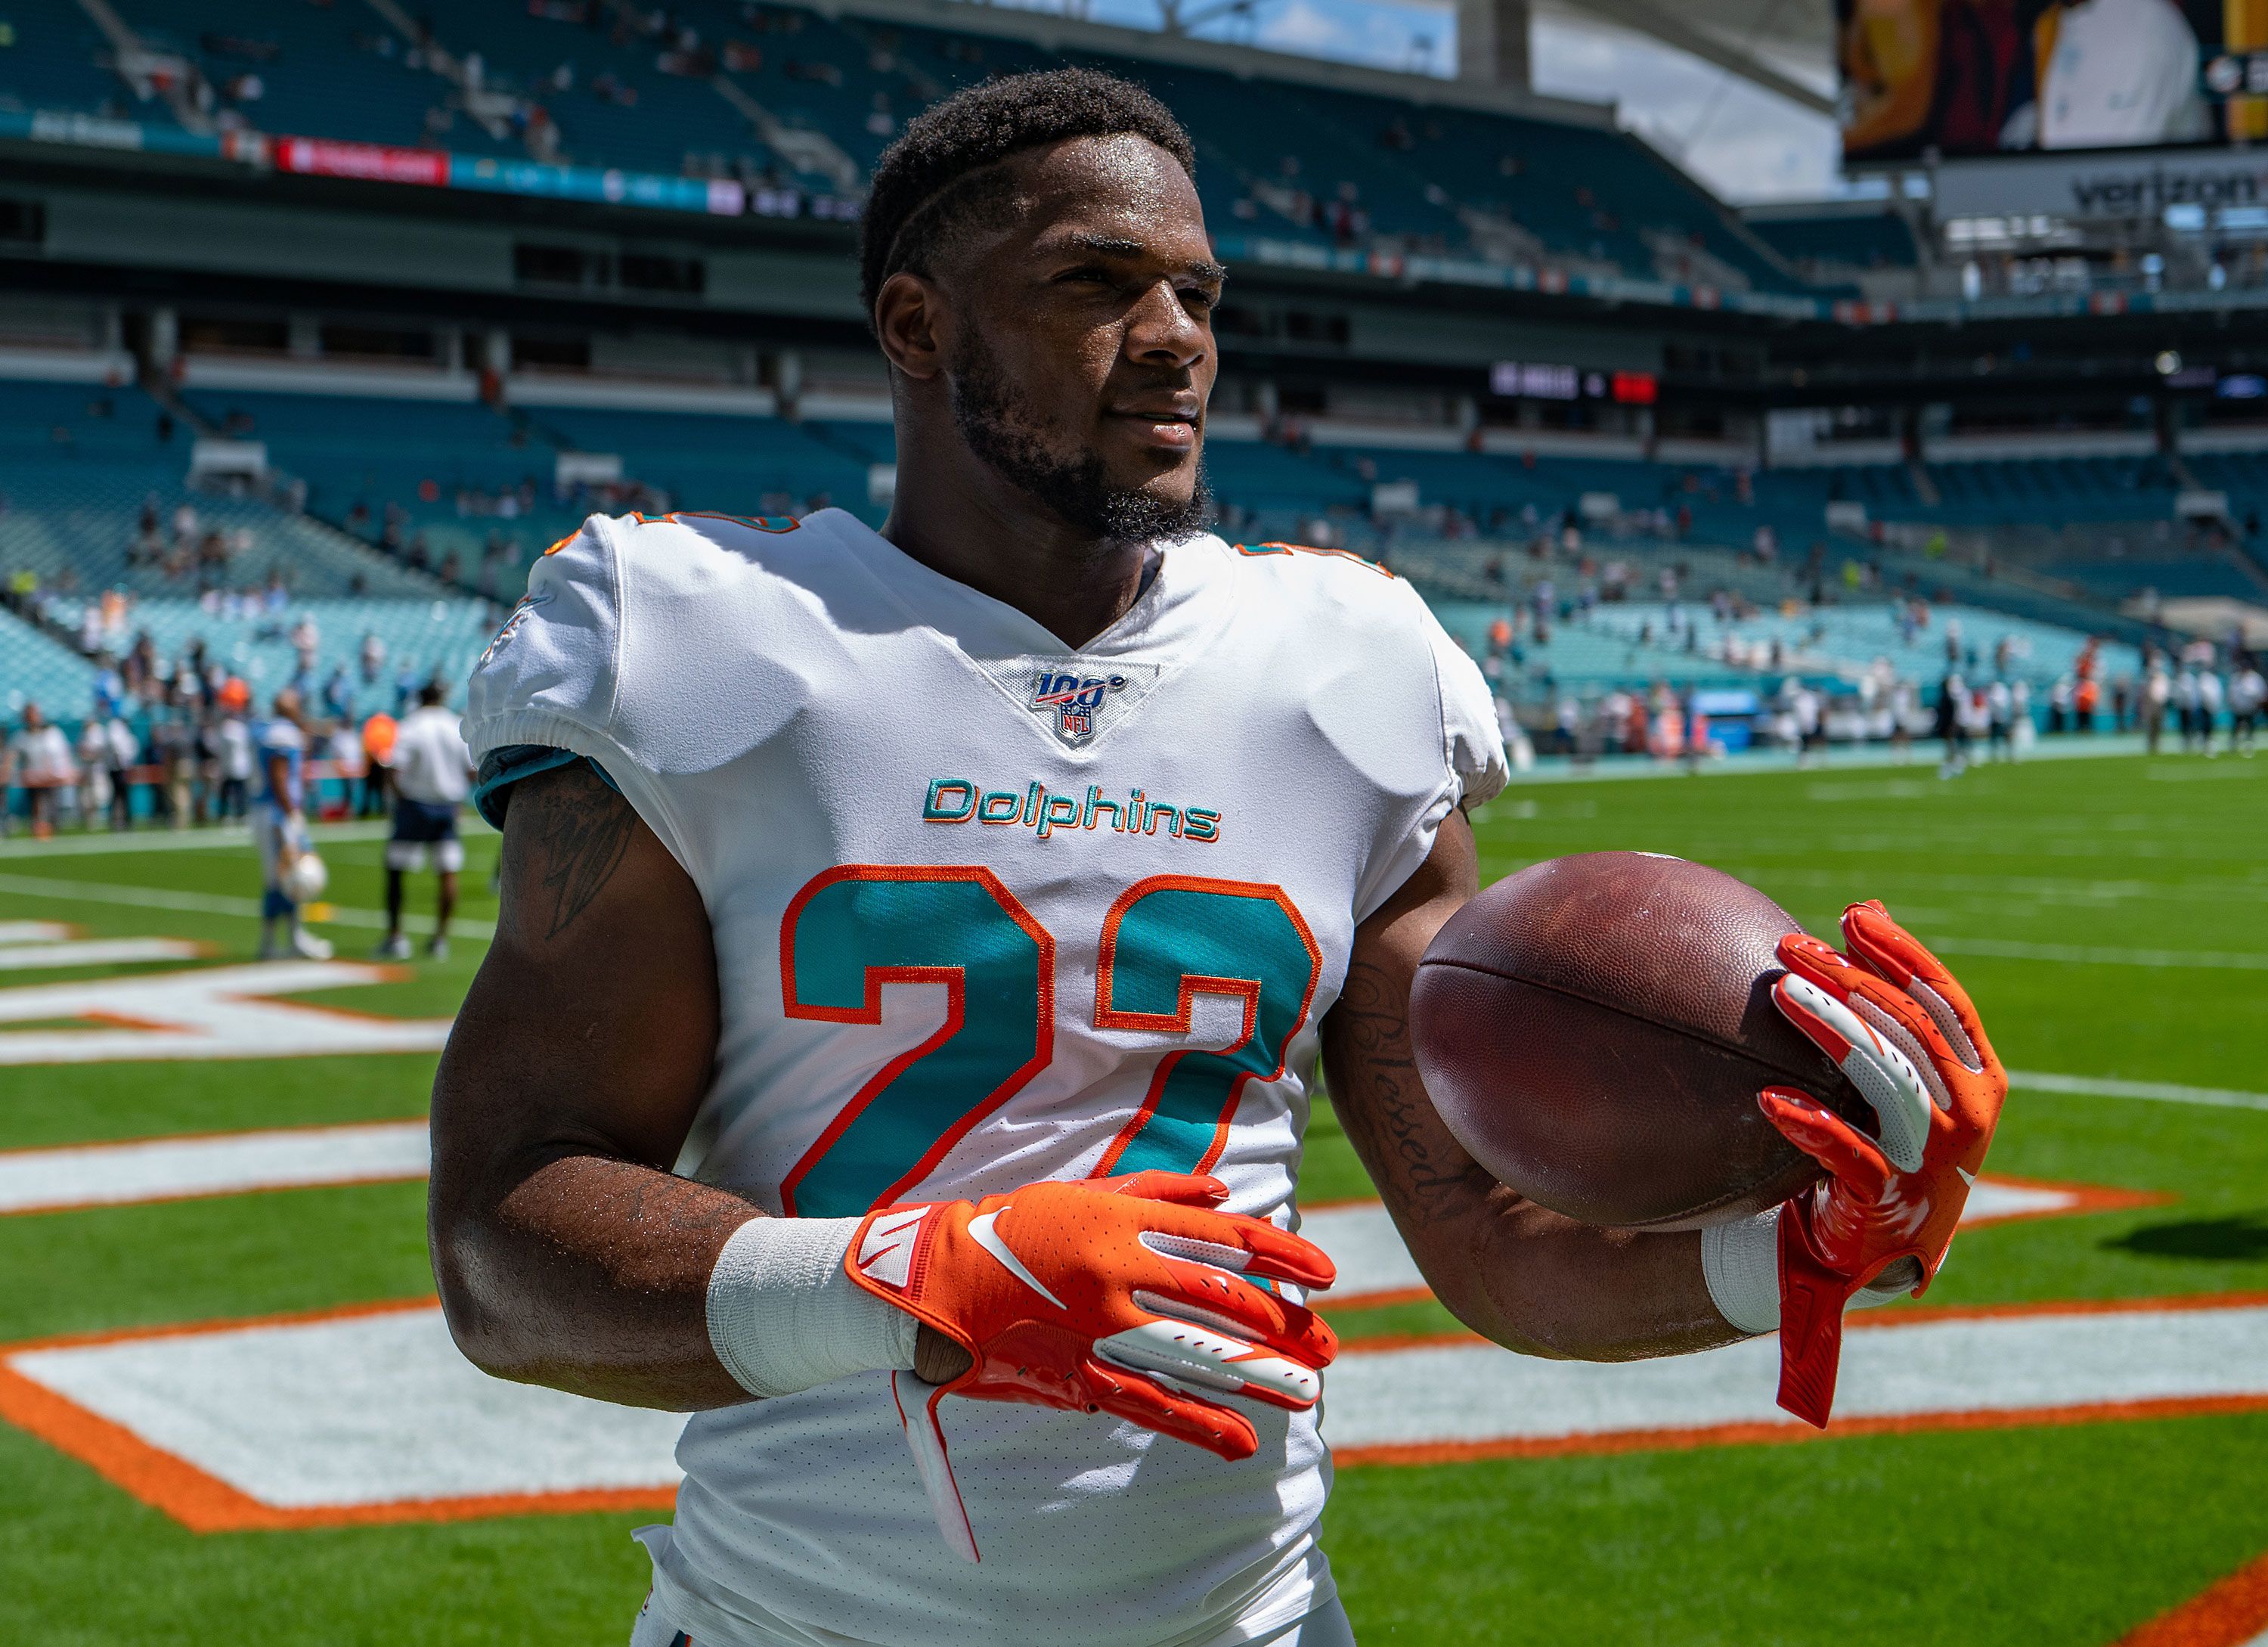 Miami Dolphins cut running back after he's accused of punching a